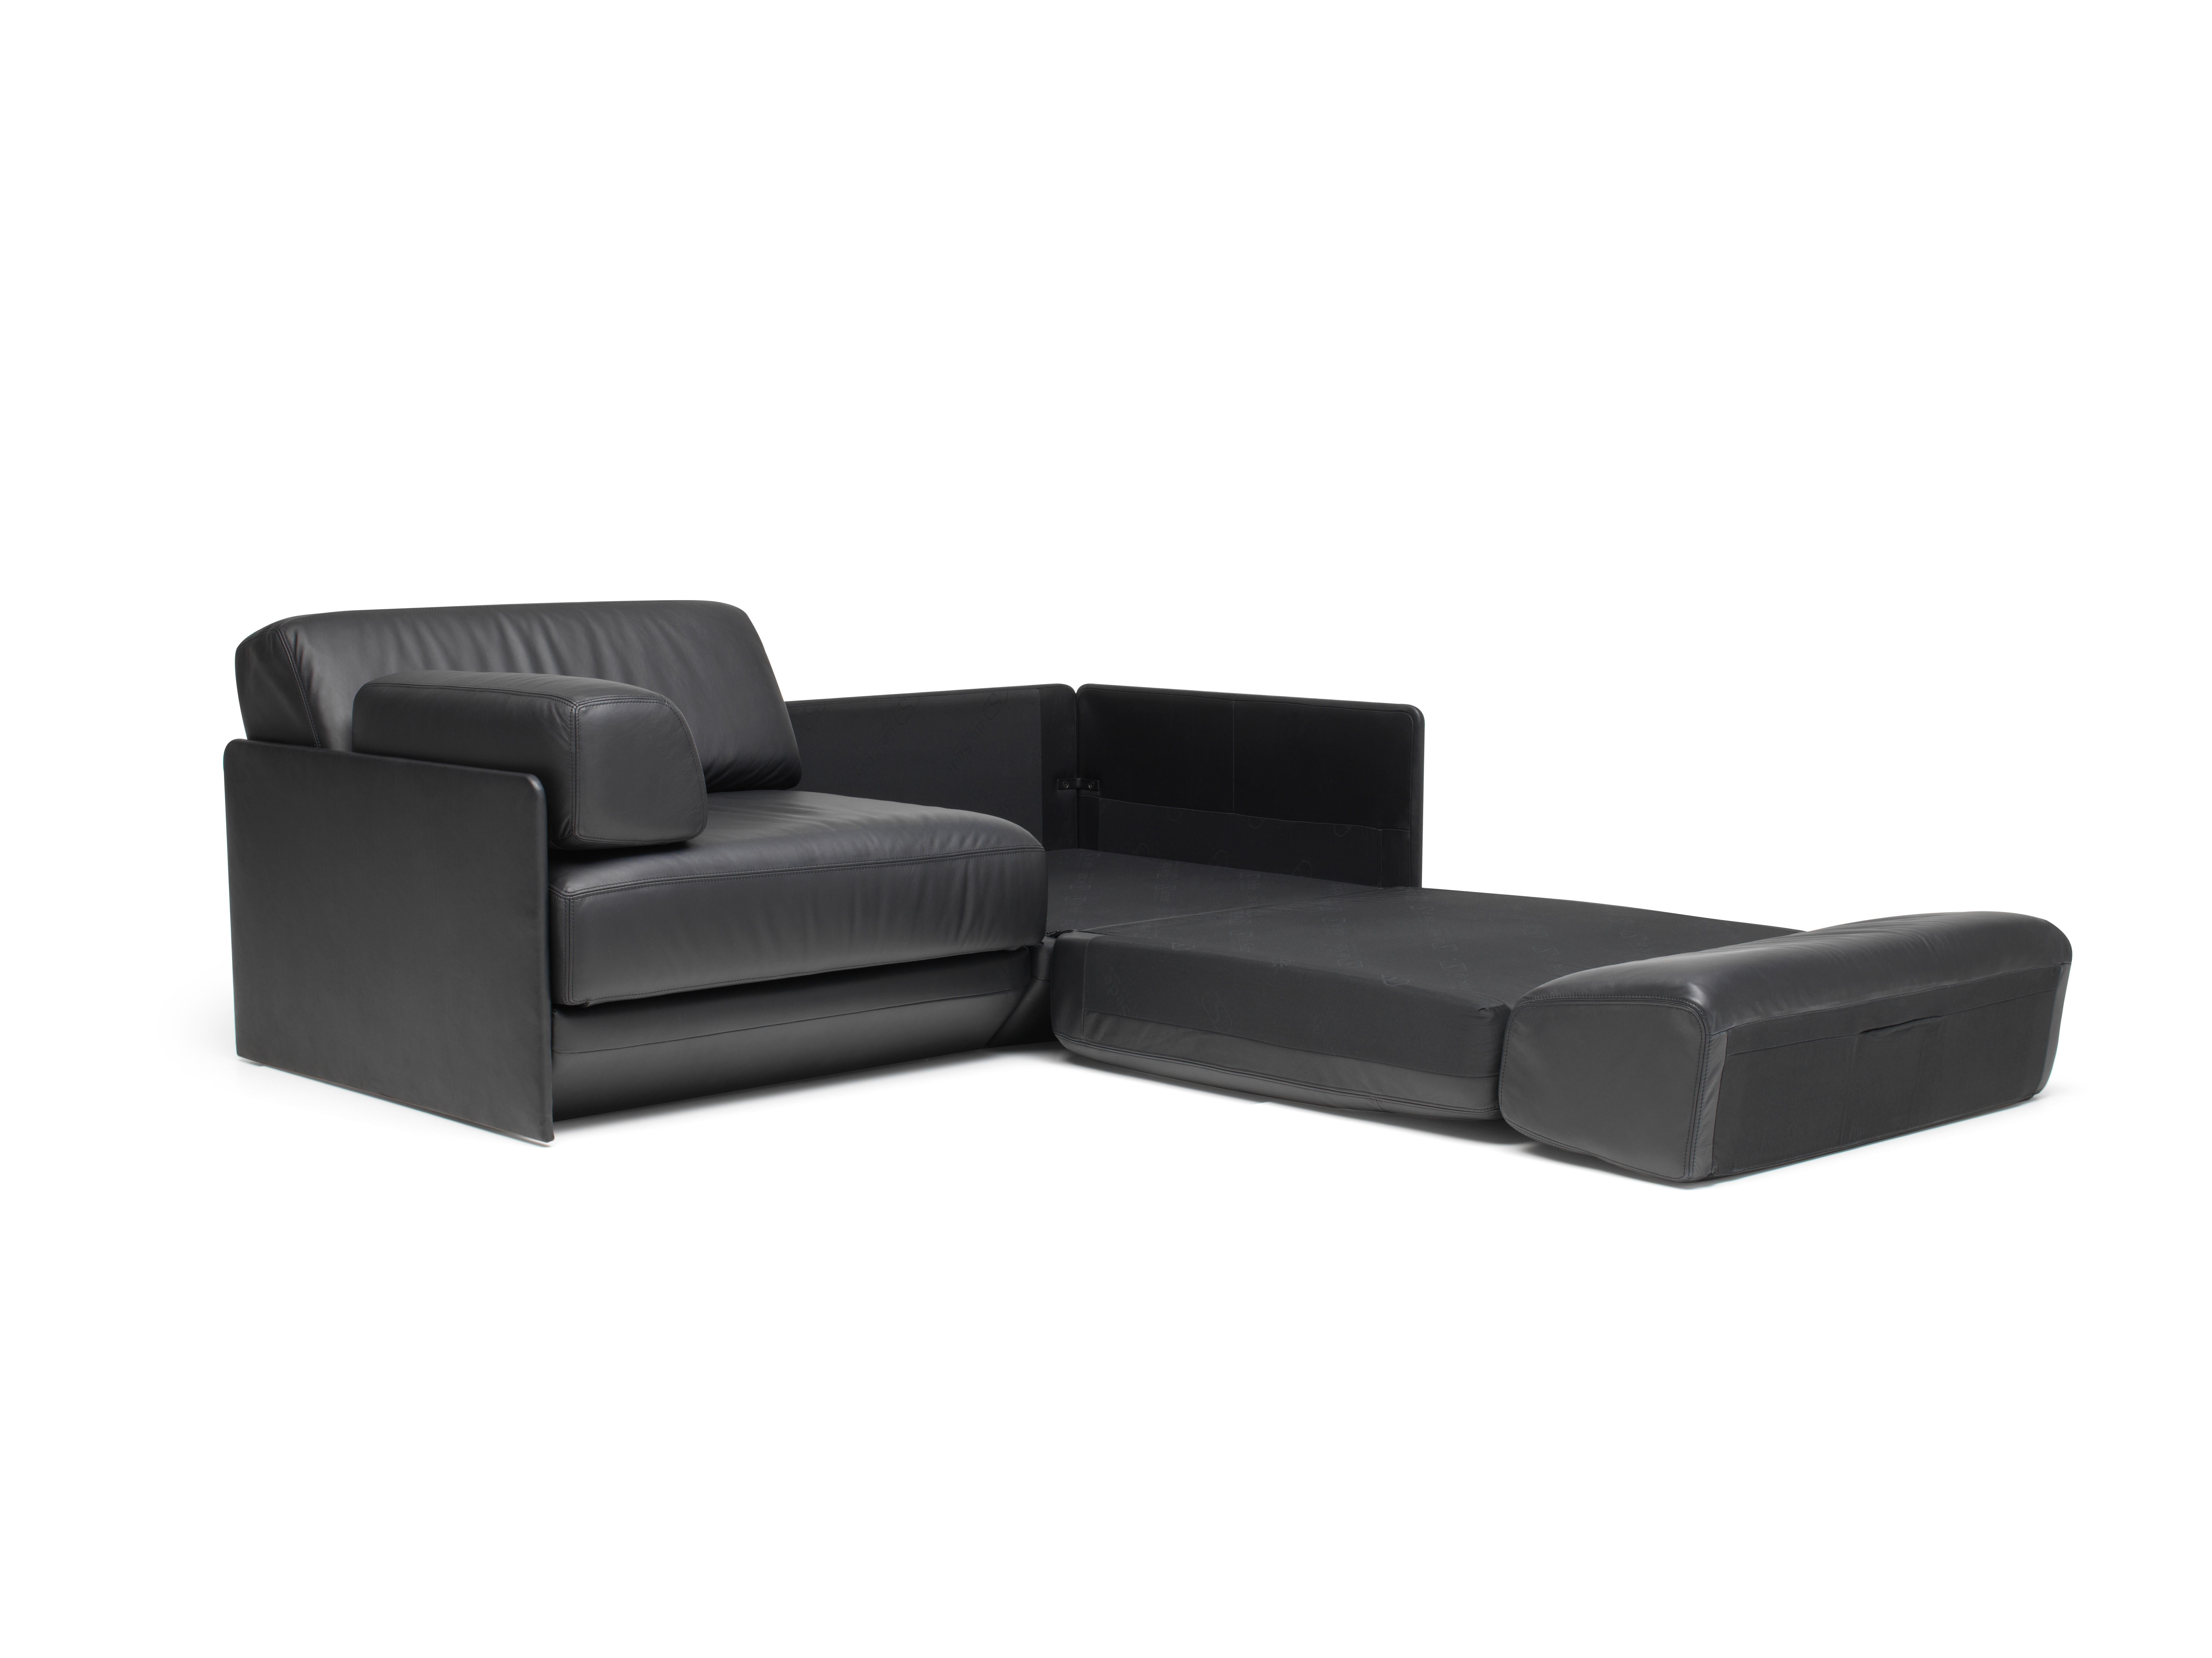 For Sale: Black DS-76 Convertible Leather Modern Sofa or Daybed by De Sede 2